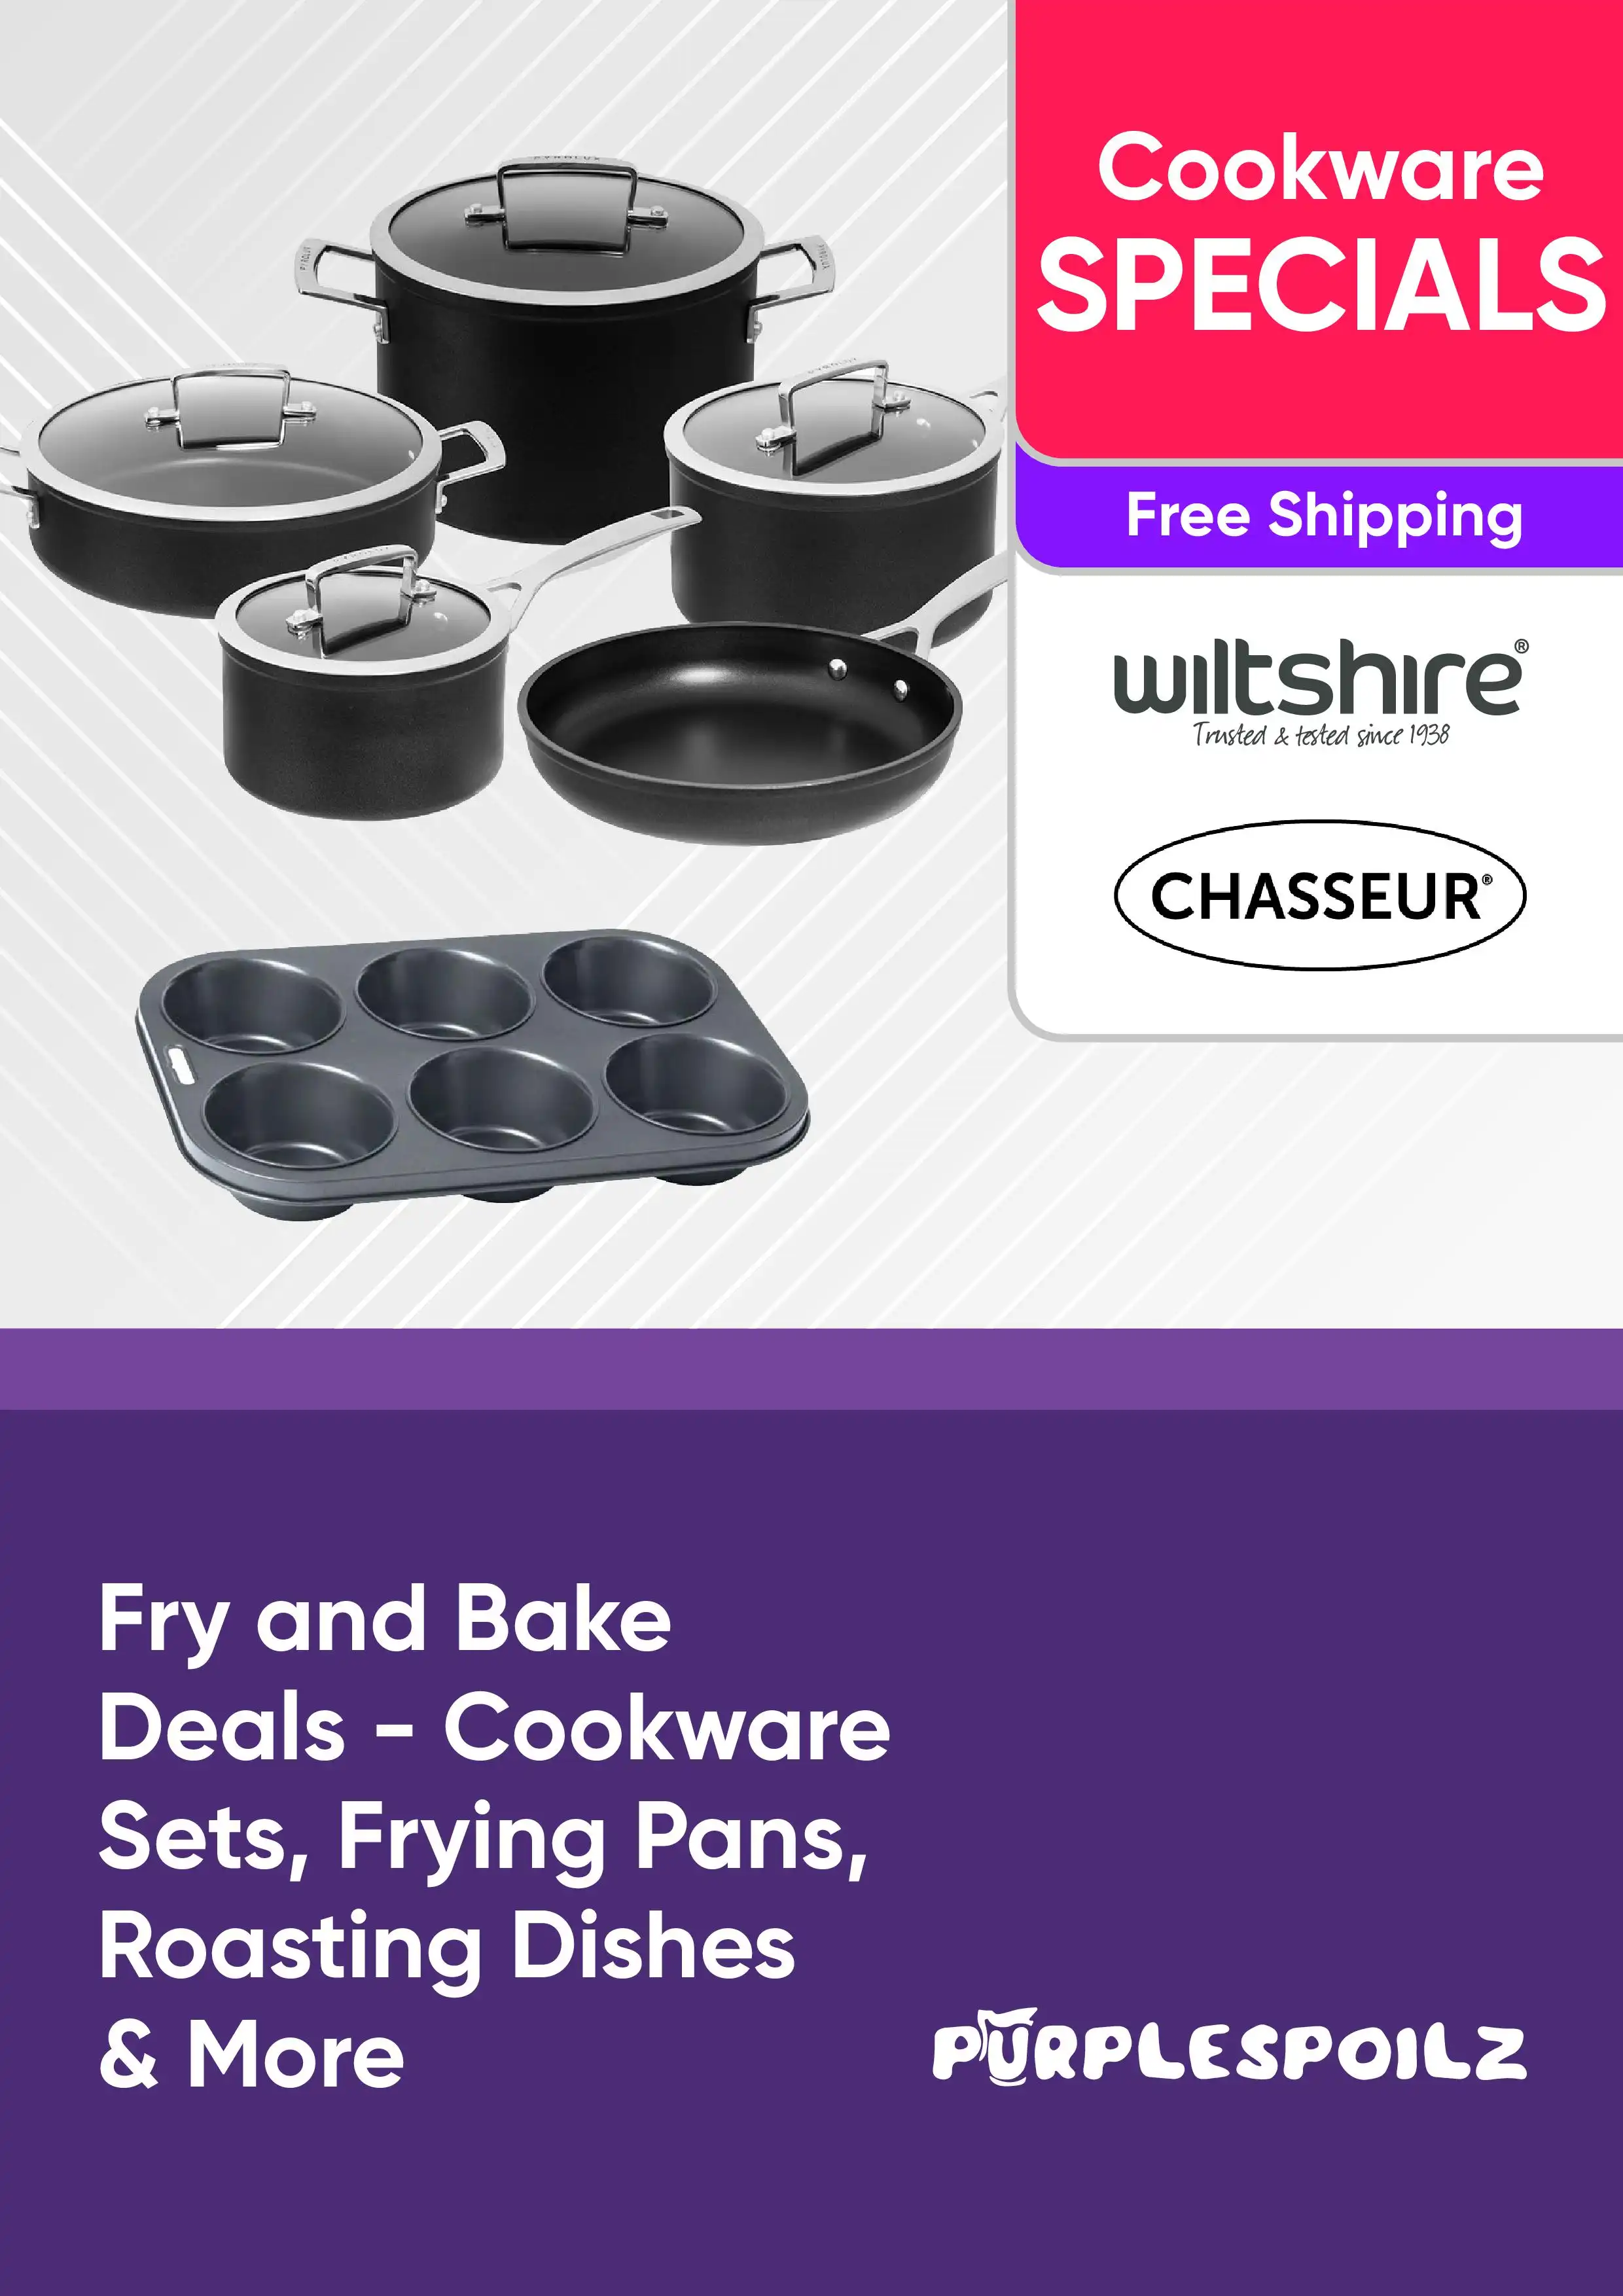 Fry and Bake Deals - Cookware Sets, Frying Pans, Roasting Dishes and More - Free Shipping